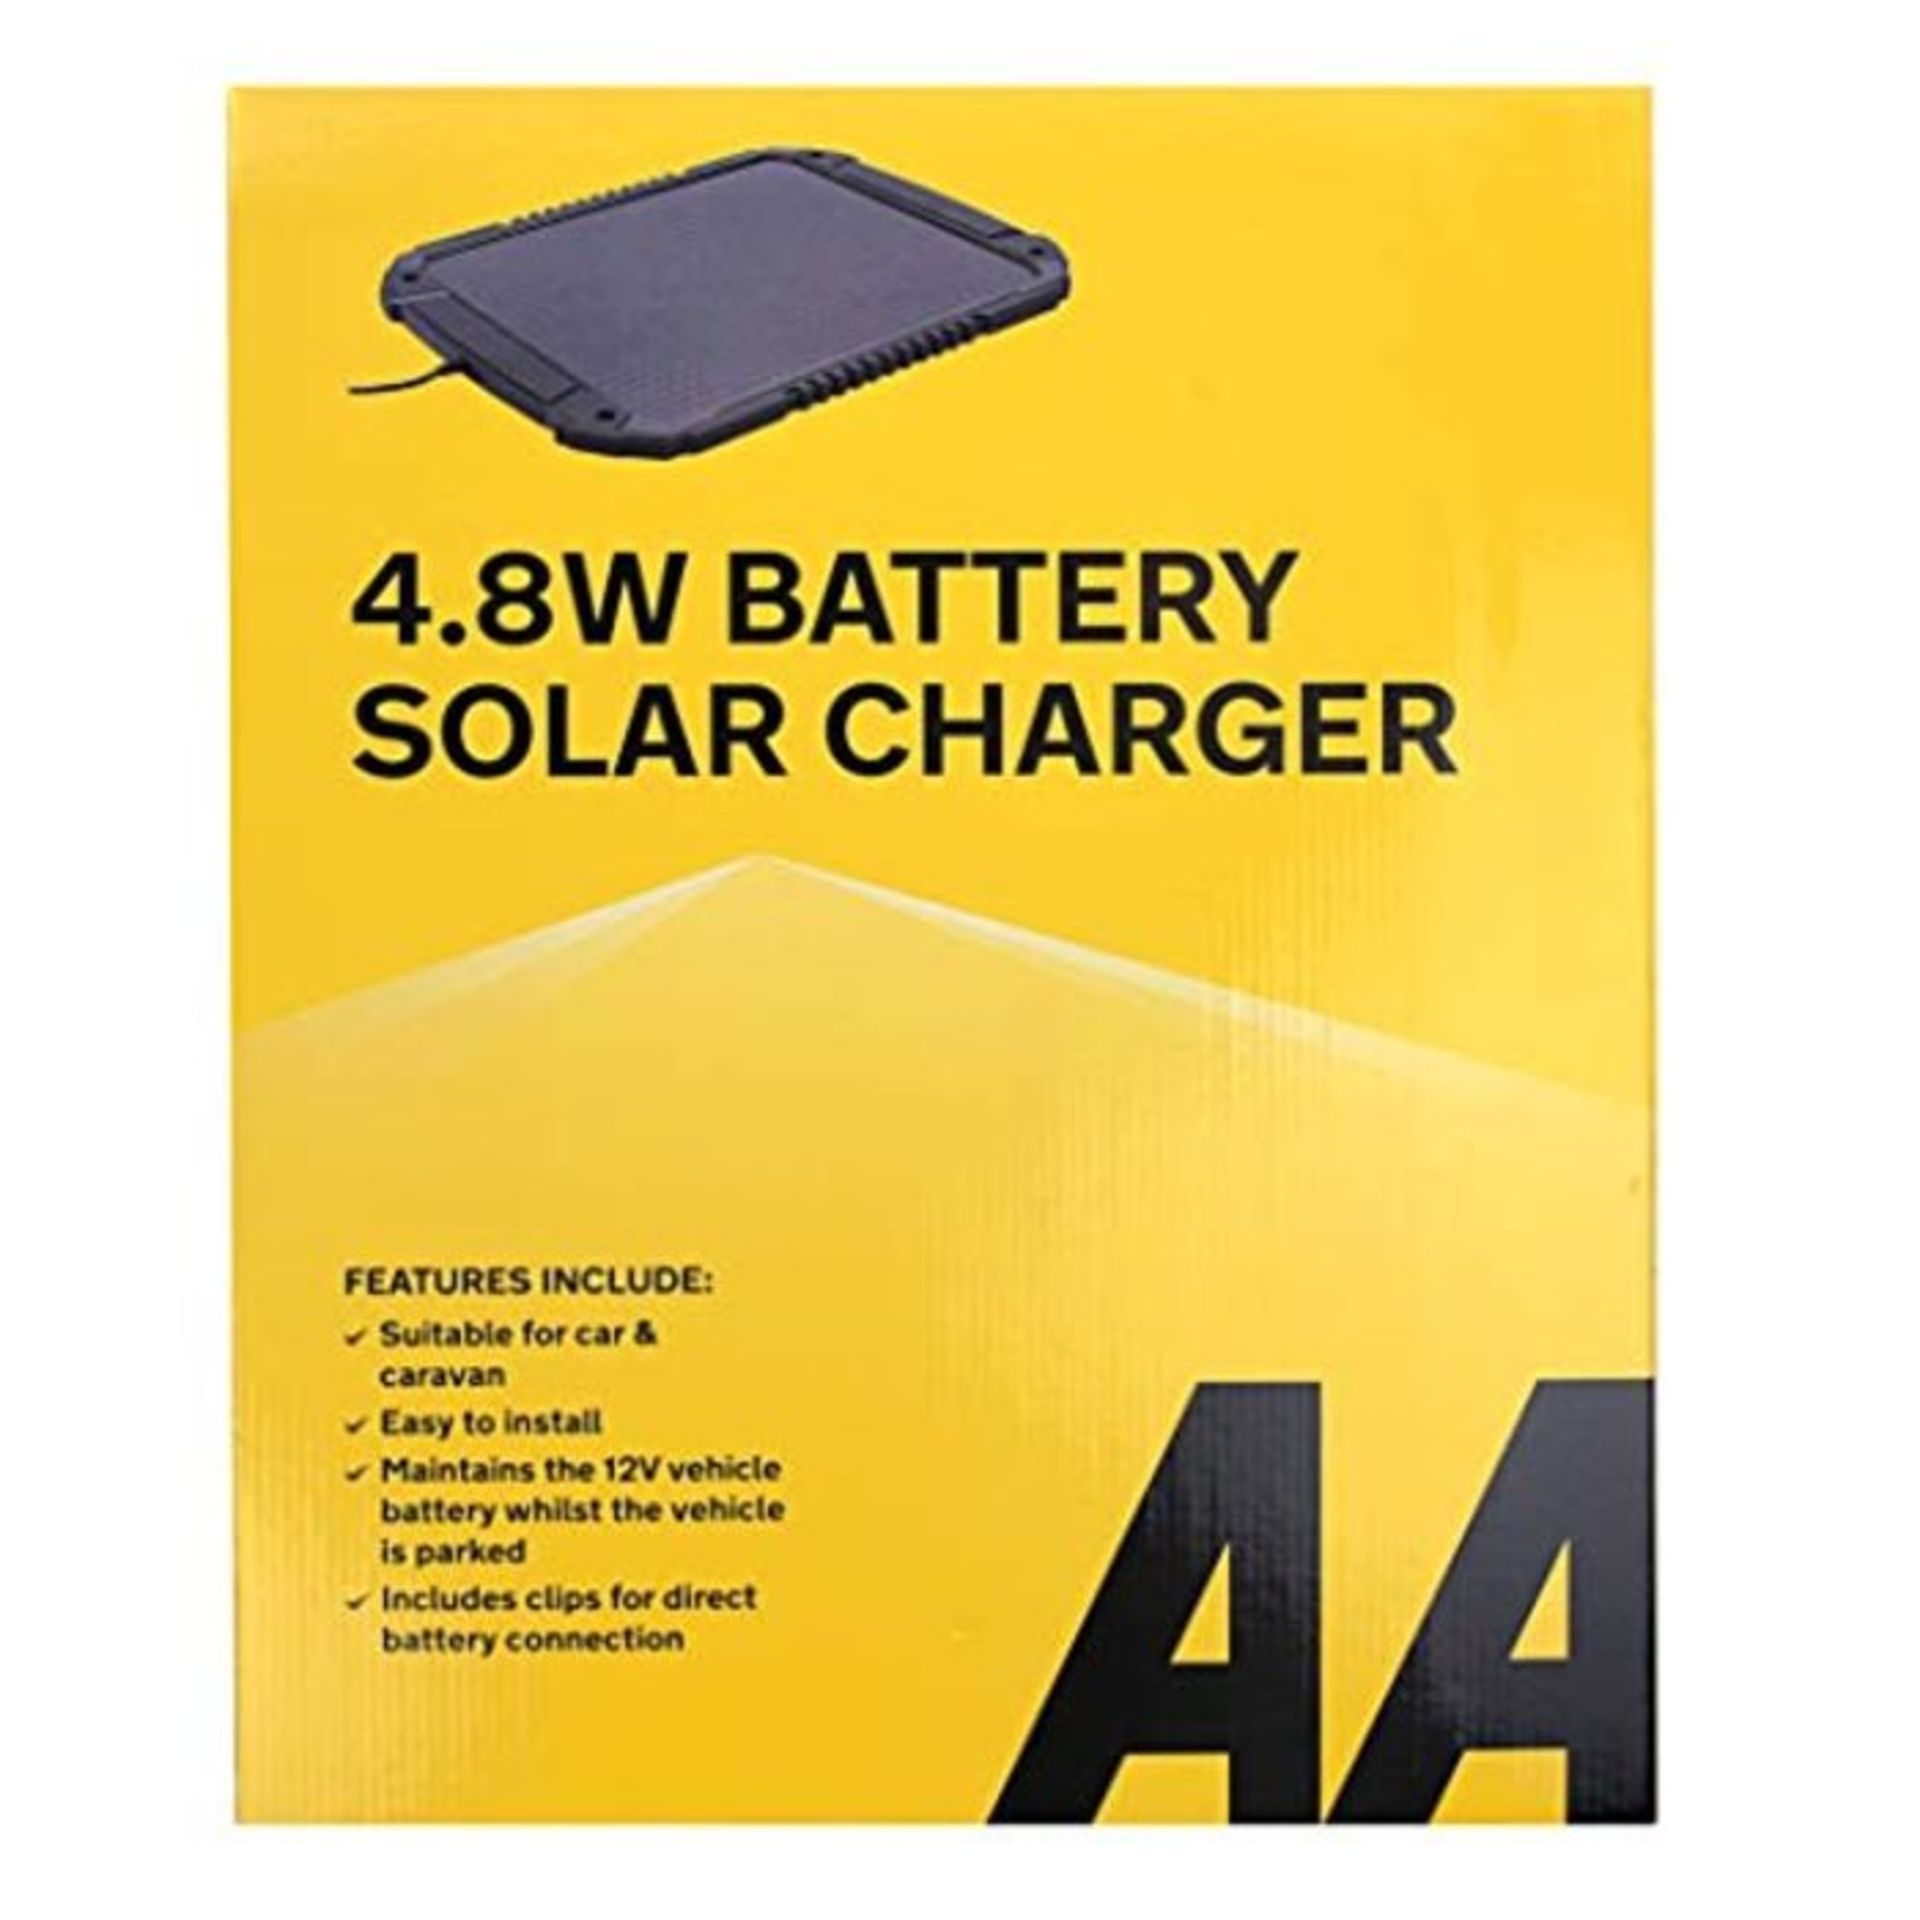 AA 12V Car Solar Battery Charger 4.8W AA1432 - For Vehicles And Caravans - Battery Con